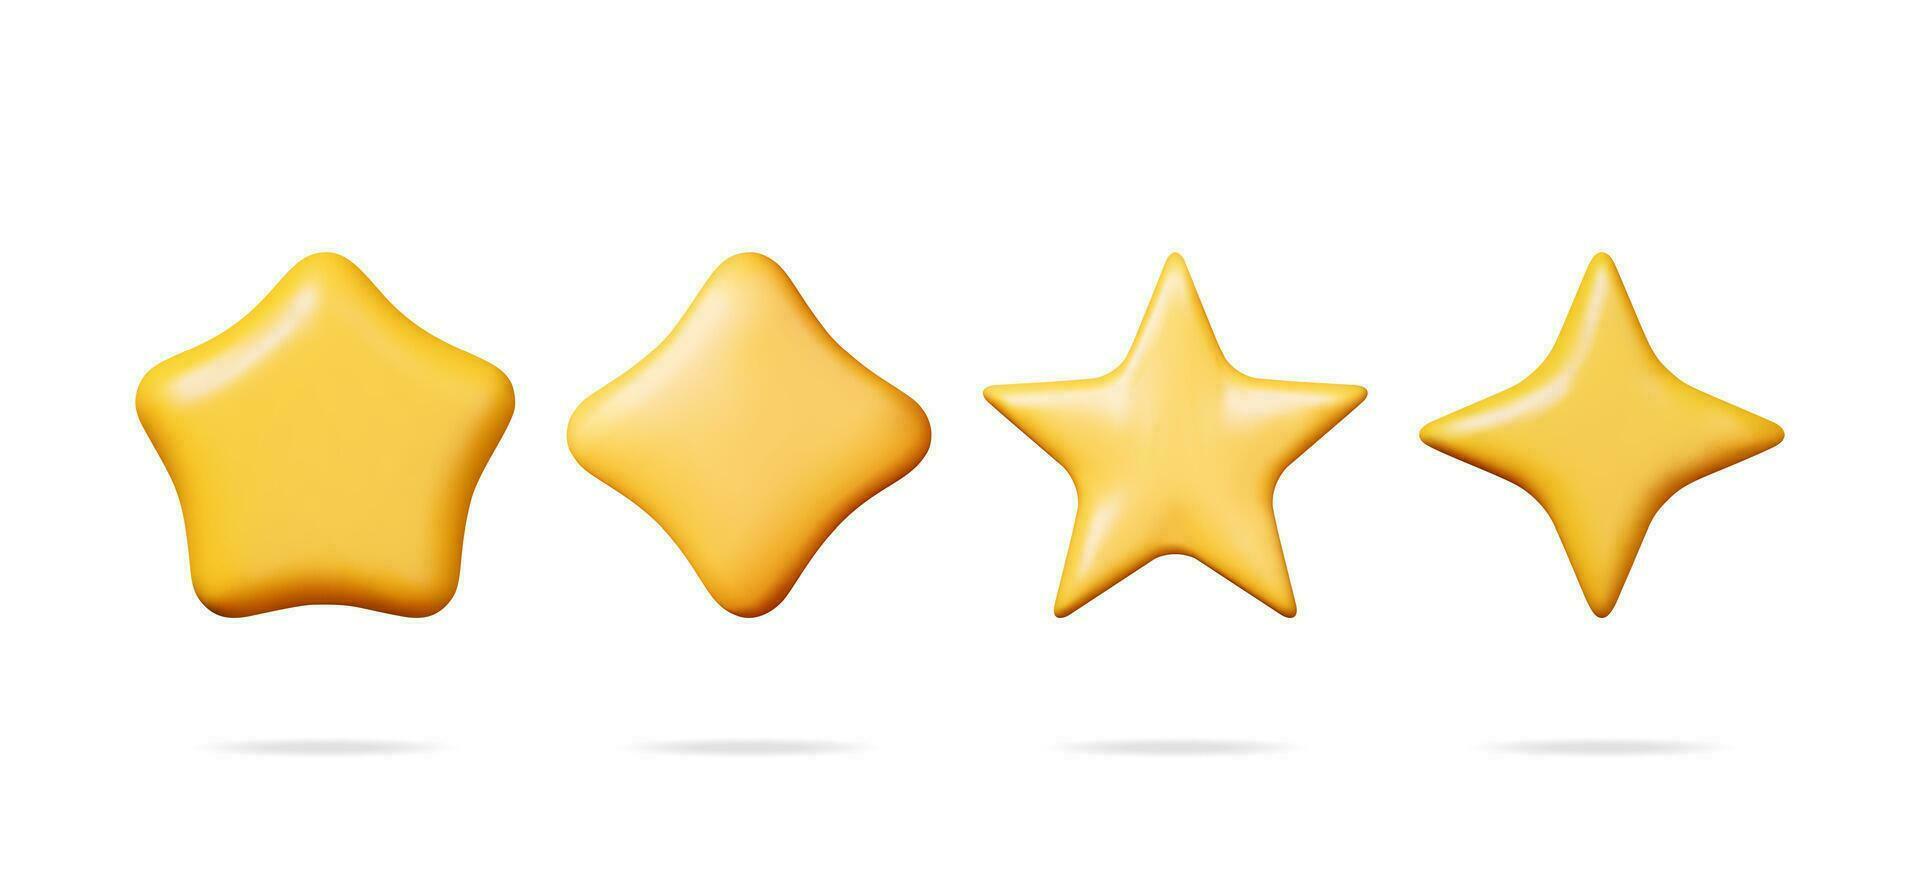 3D Glossy Yellow Star in Different Shapes Isolated. Reviews Round Star Realistic Render Collection. Testimonial Rating, Feedback, Survey, Quality and Review. Achievements or Goal. Vector Illustration